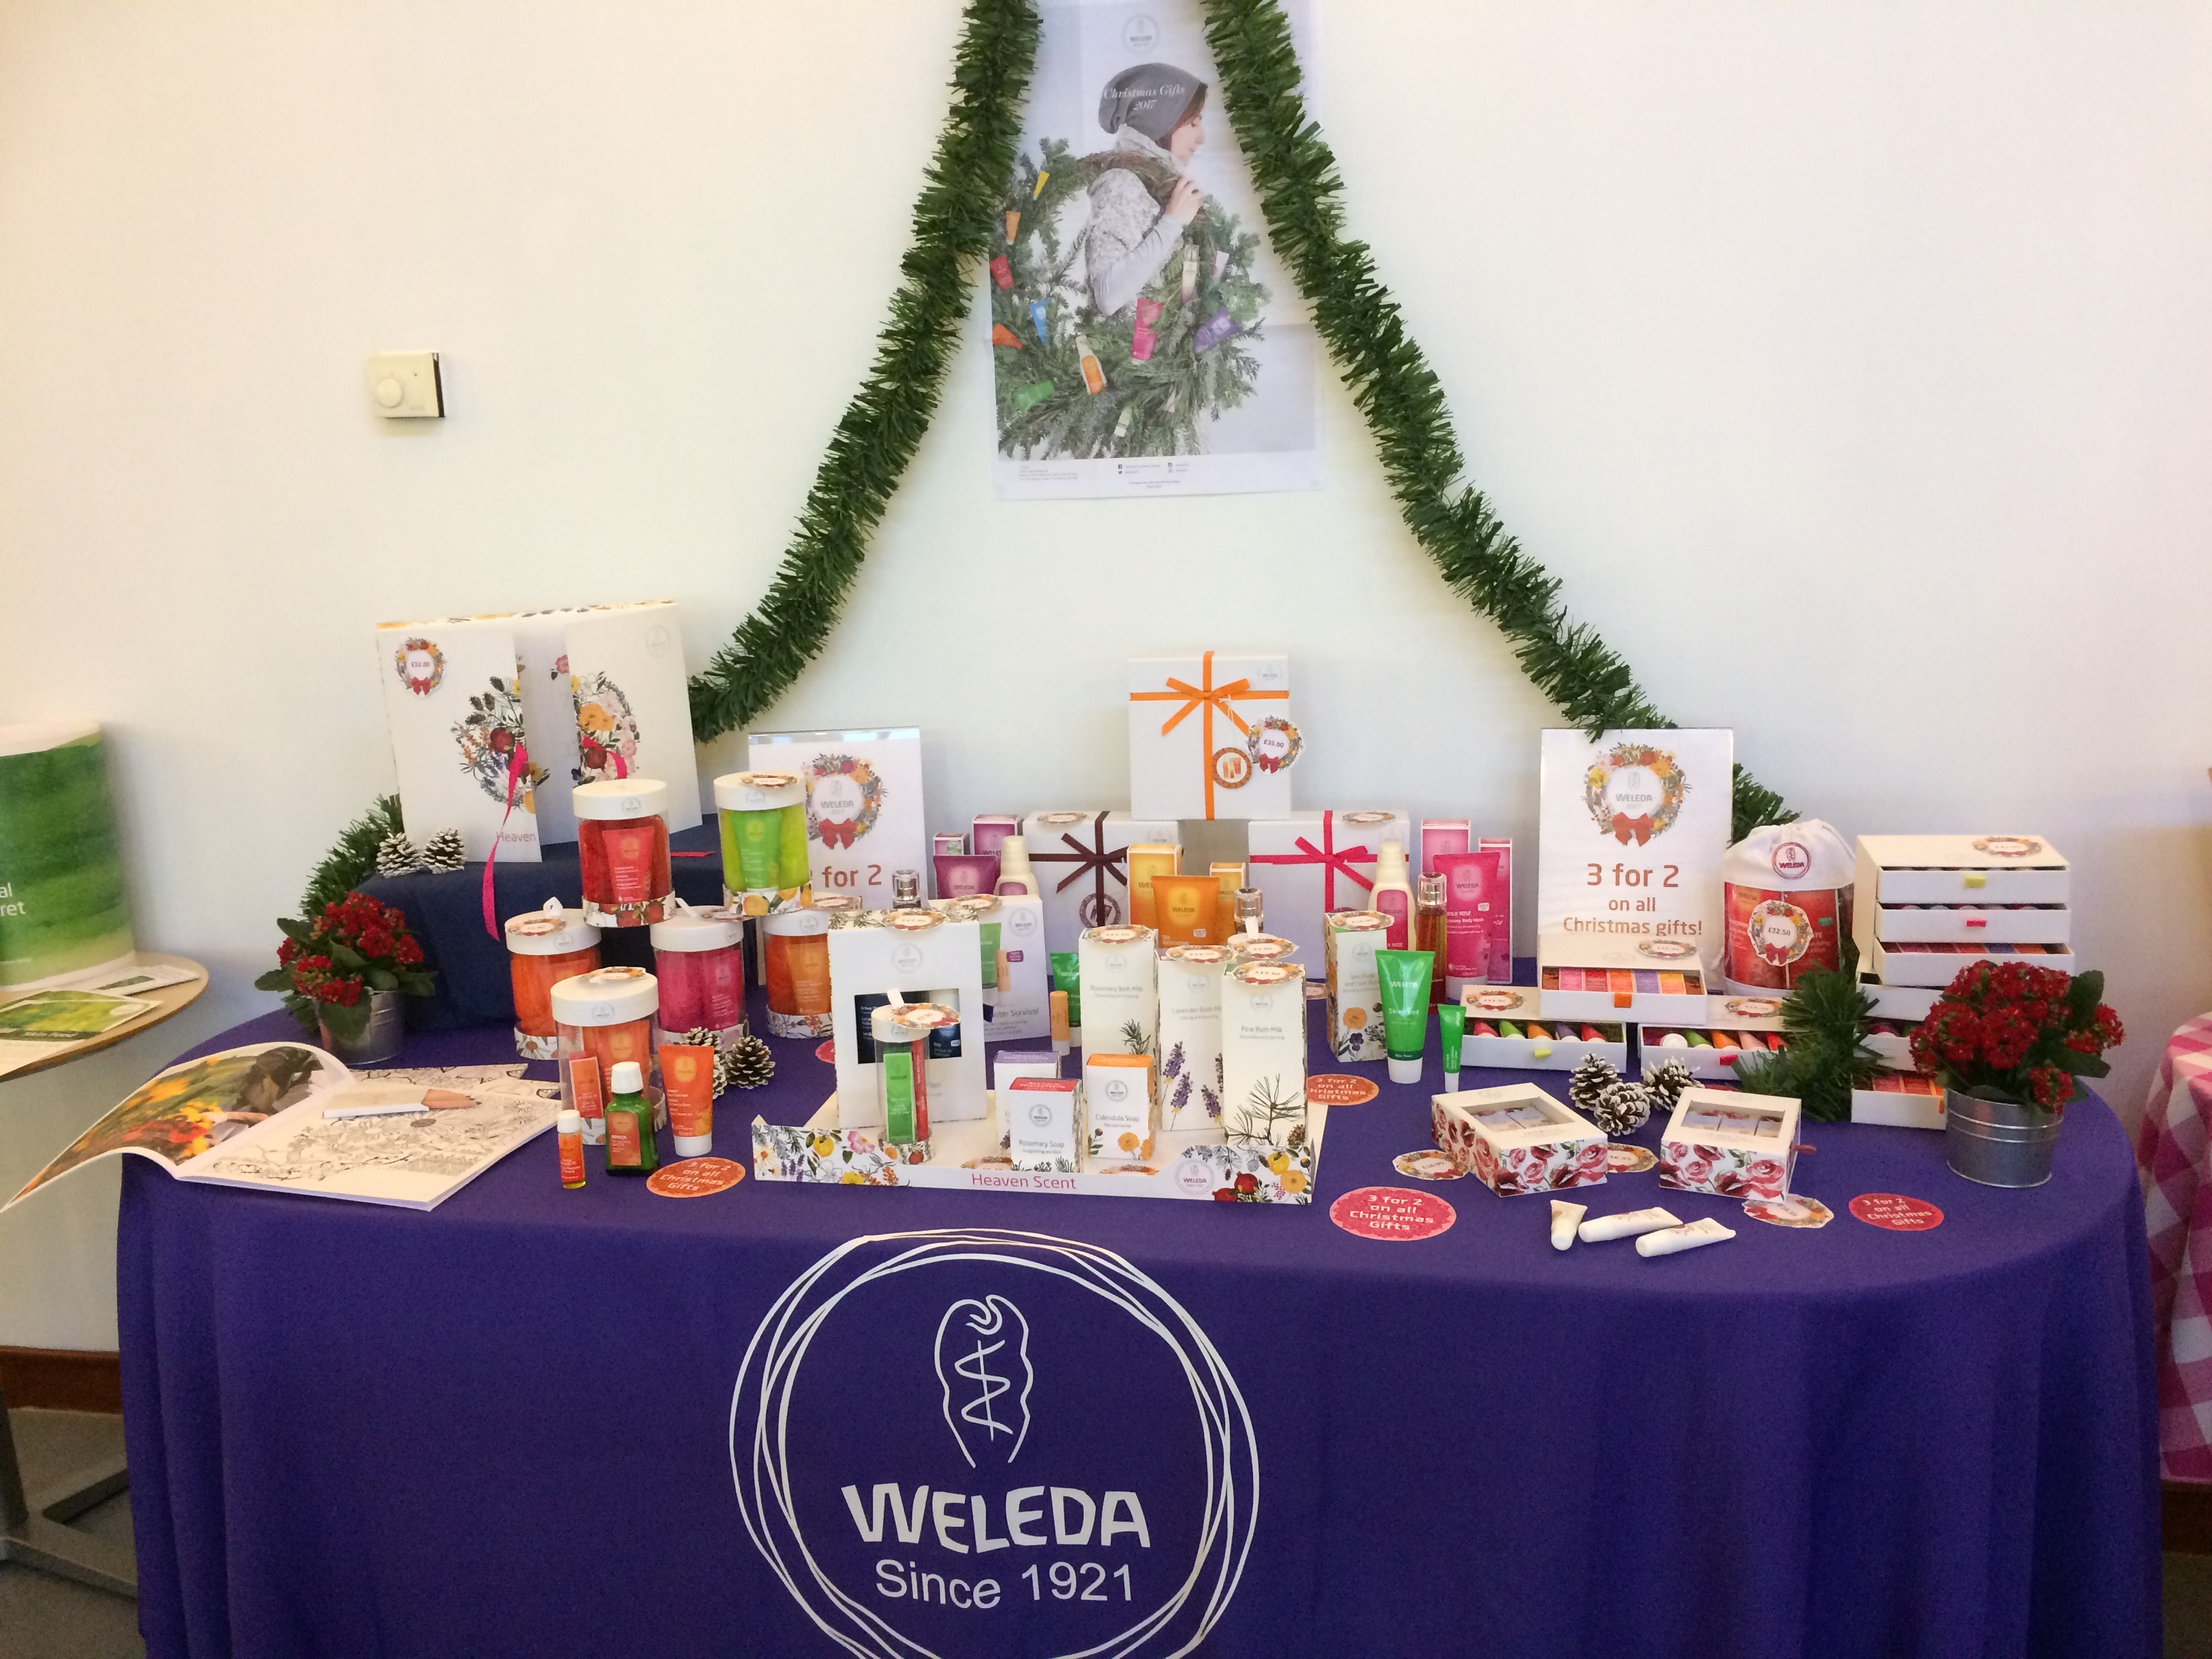 The table of gifts at Weleda